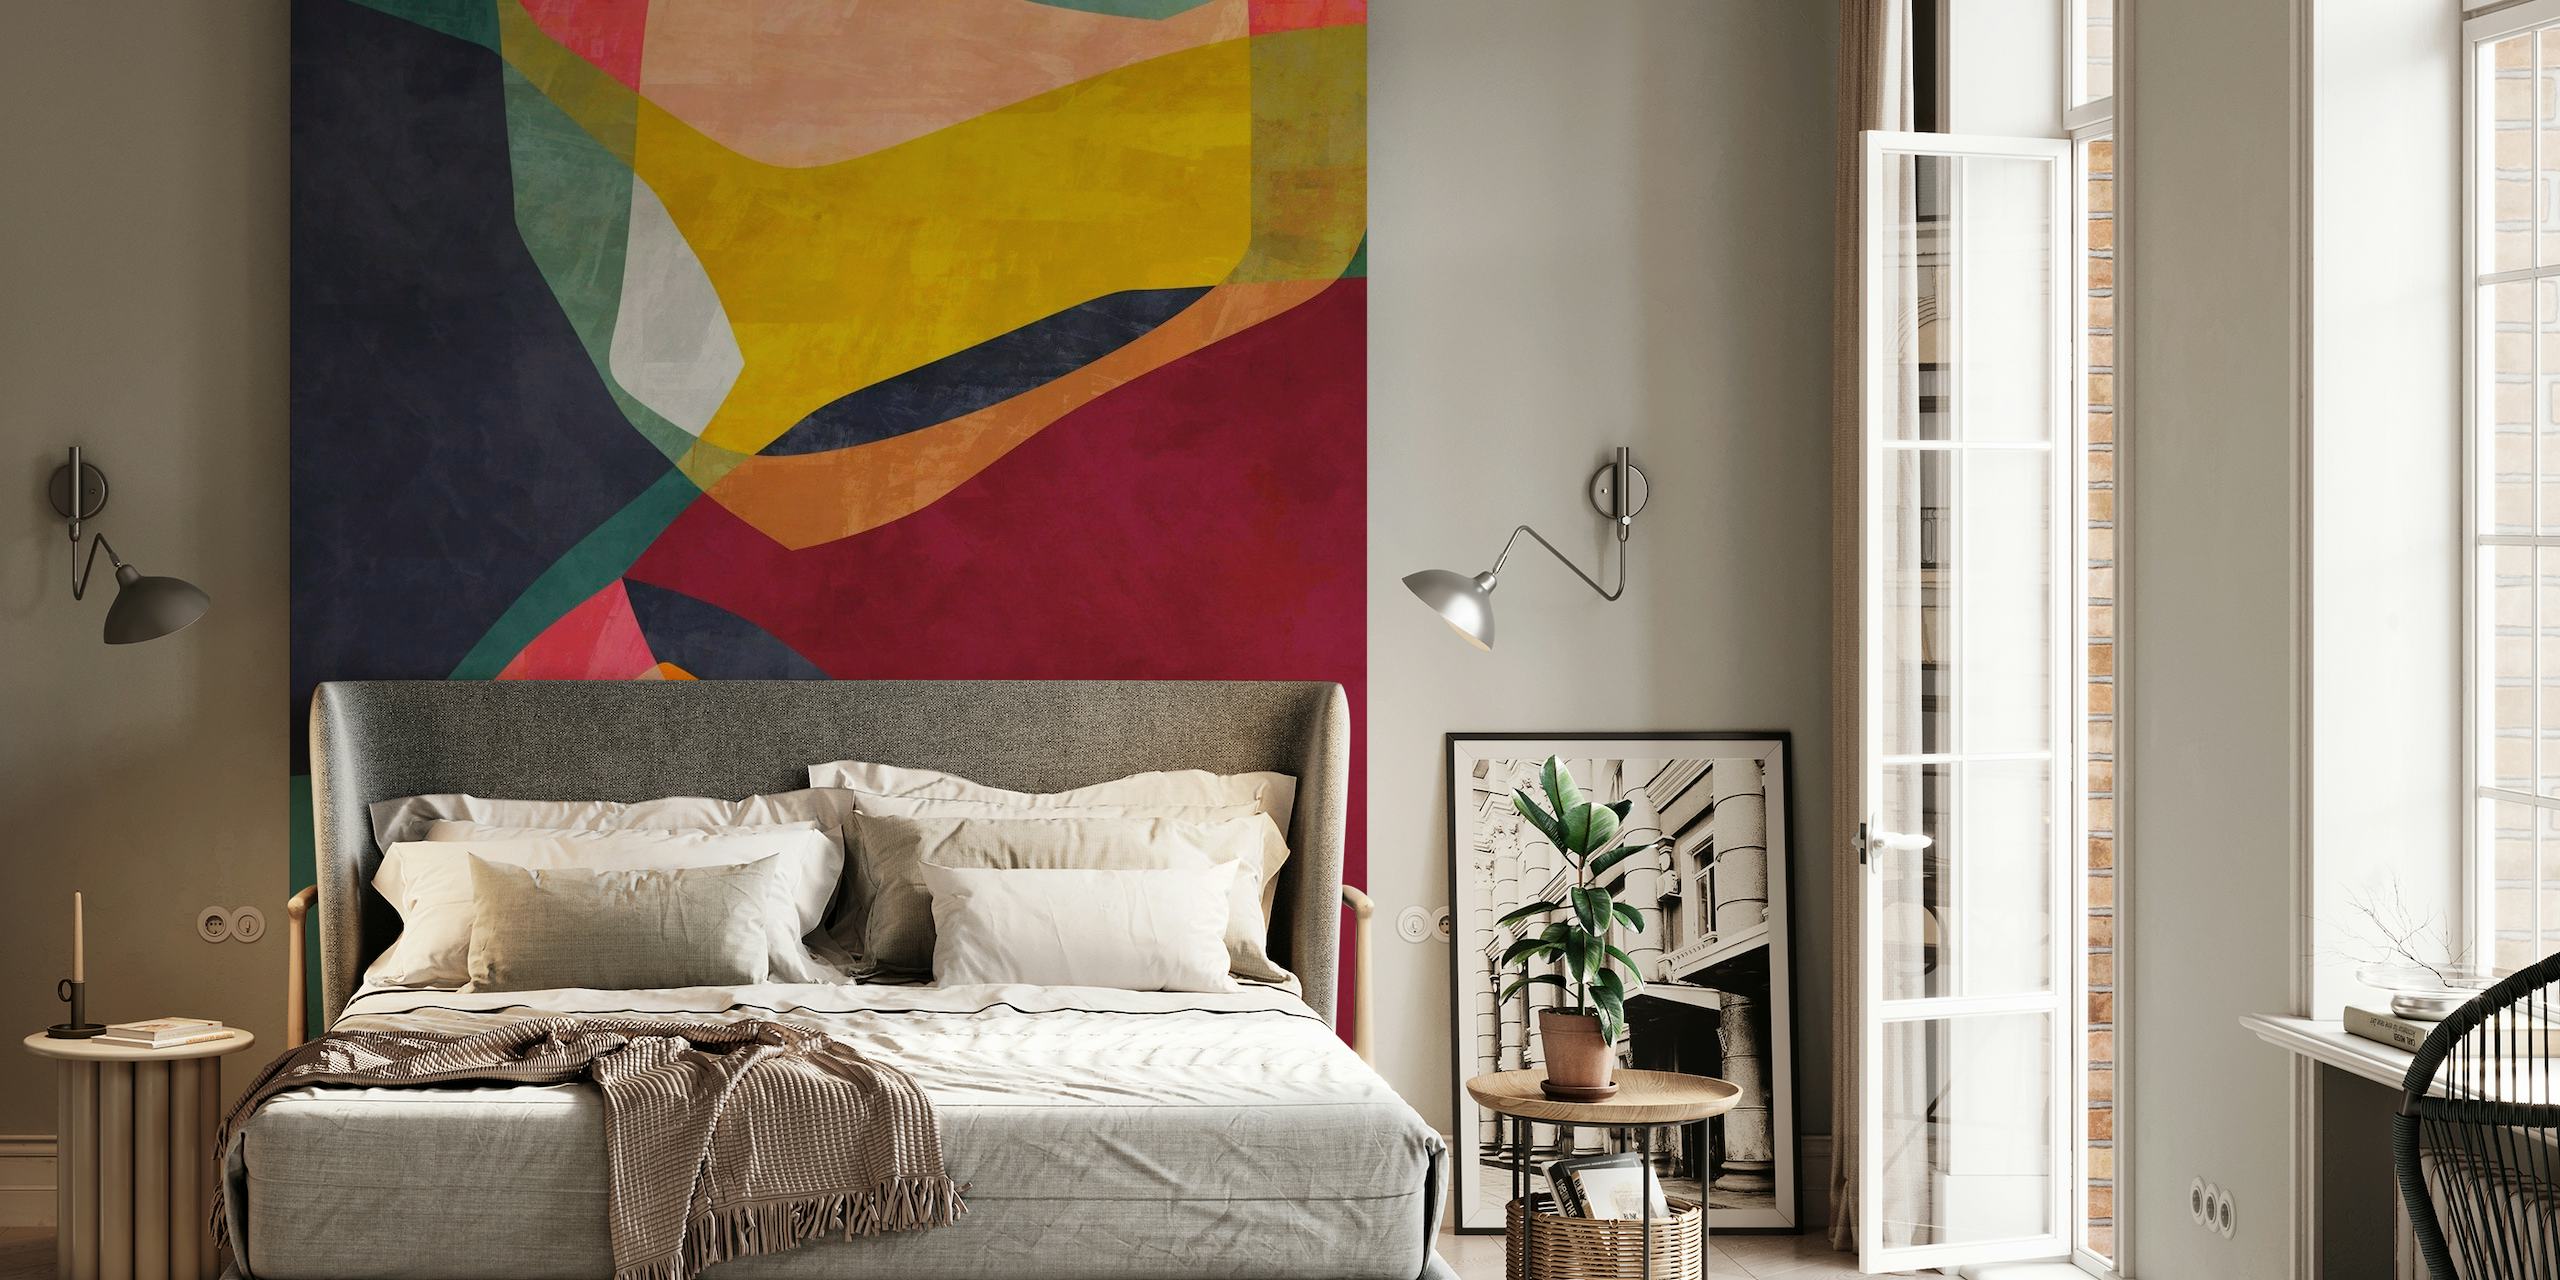 Abstract geometric shapes wall mural with overlapping colors in navy, maroon, and green tones